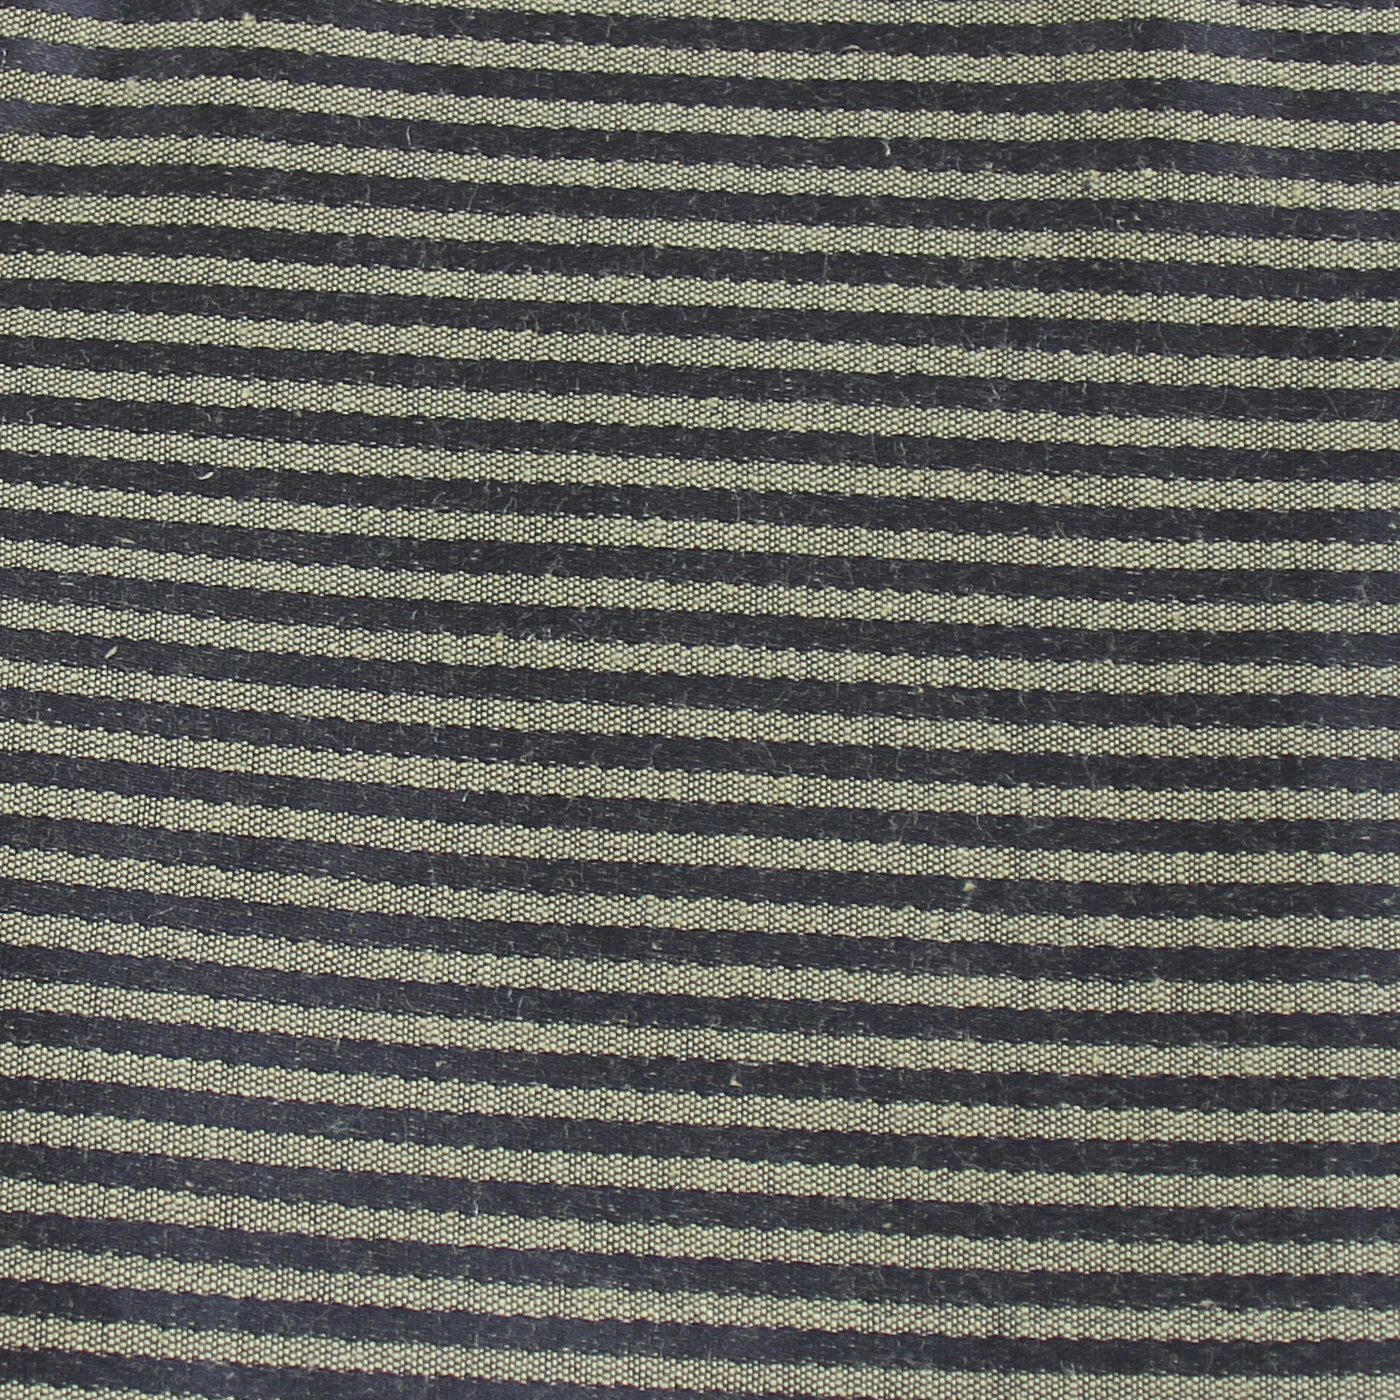 NO 4-45 RS X1 D NO 29 Fabric Upholstery Sample